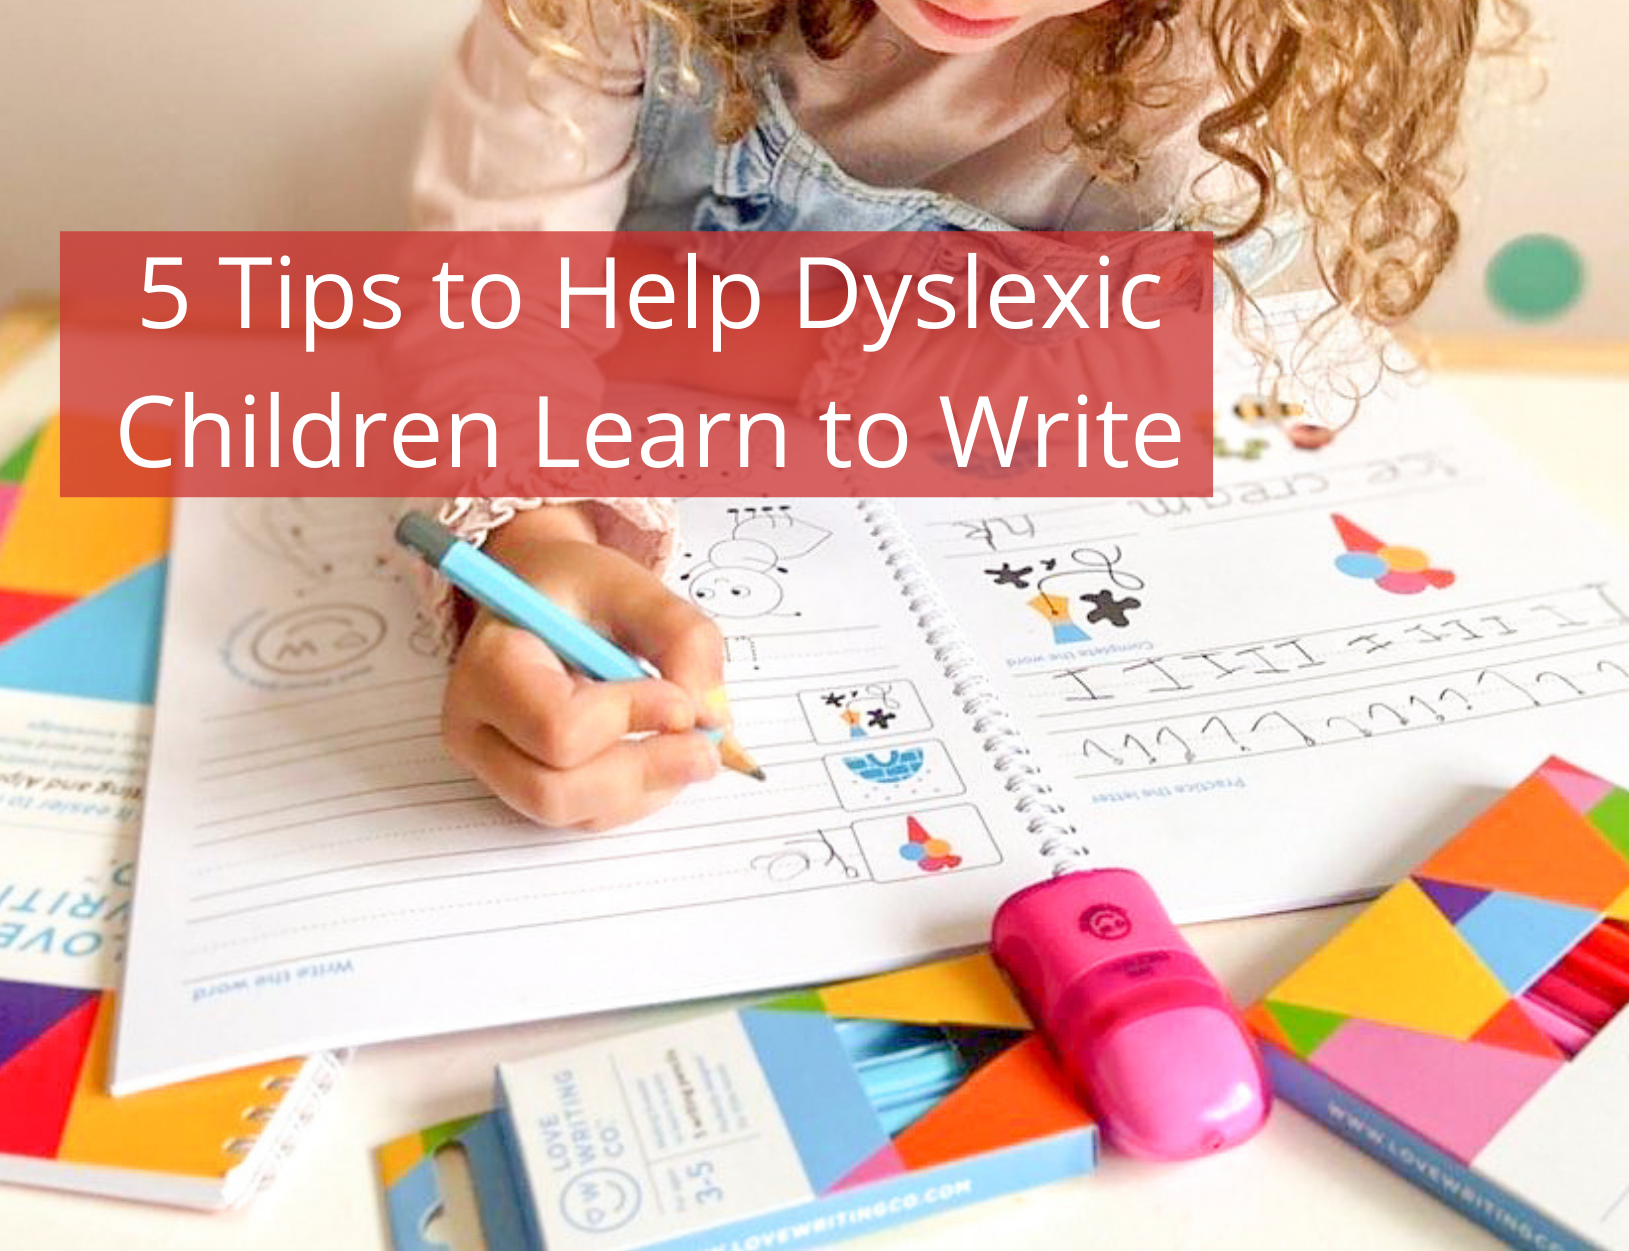 5 Tips to Help Dyslexic Children Learn to Write